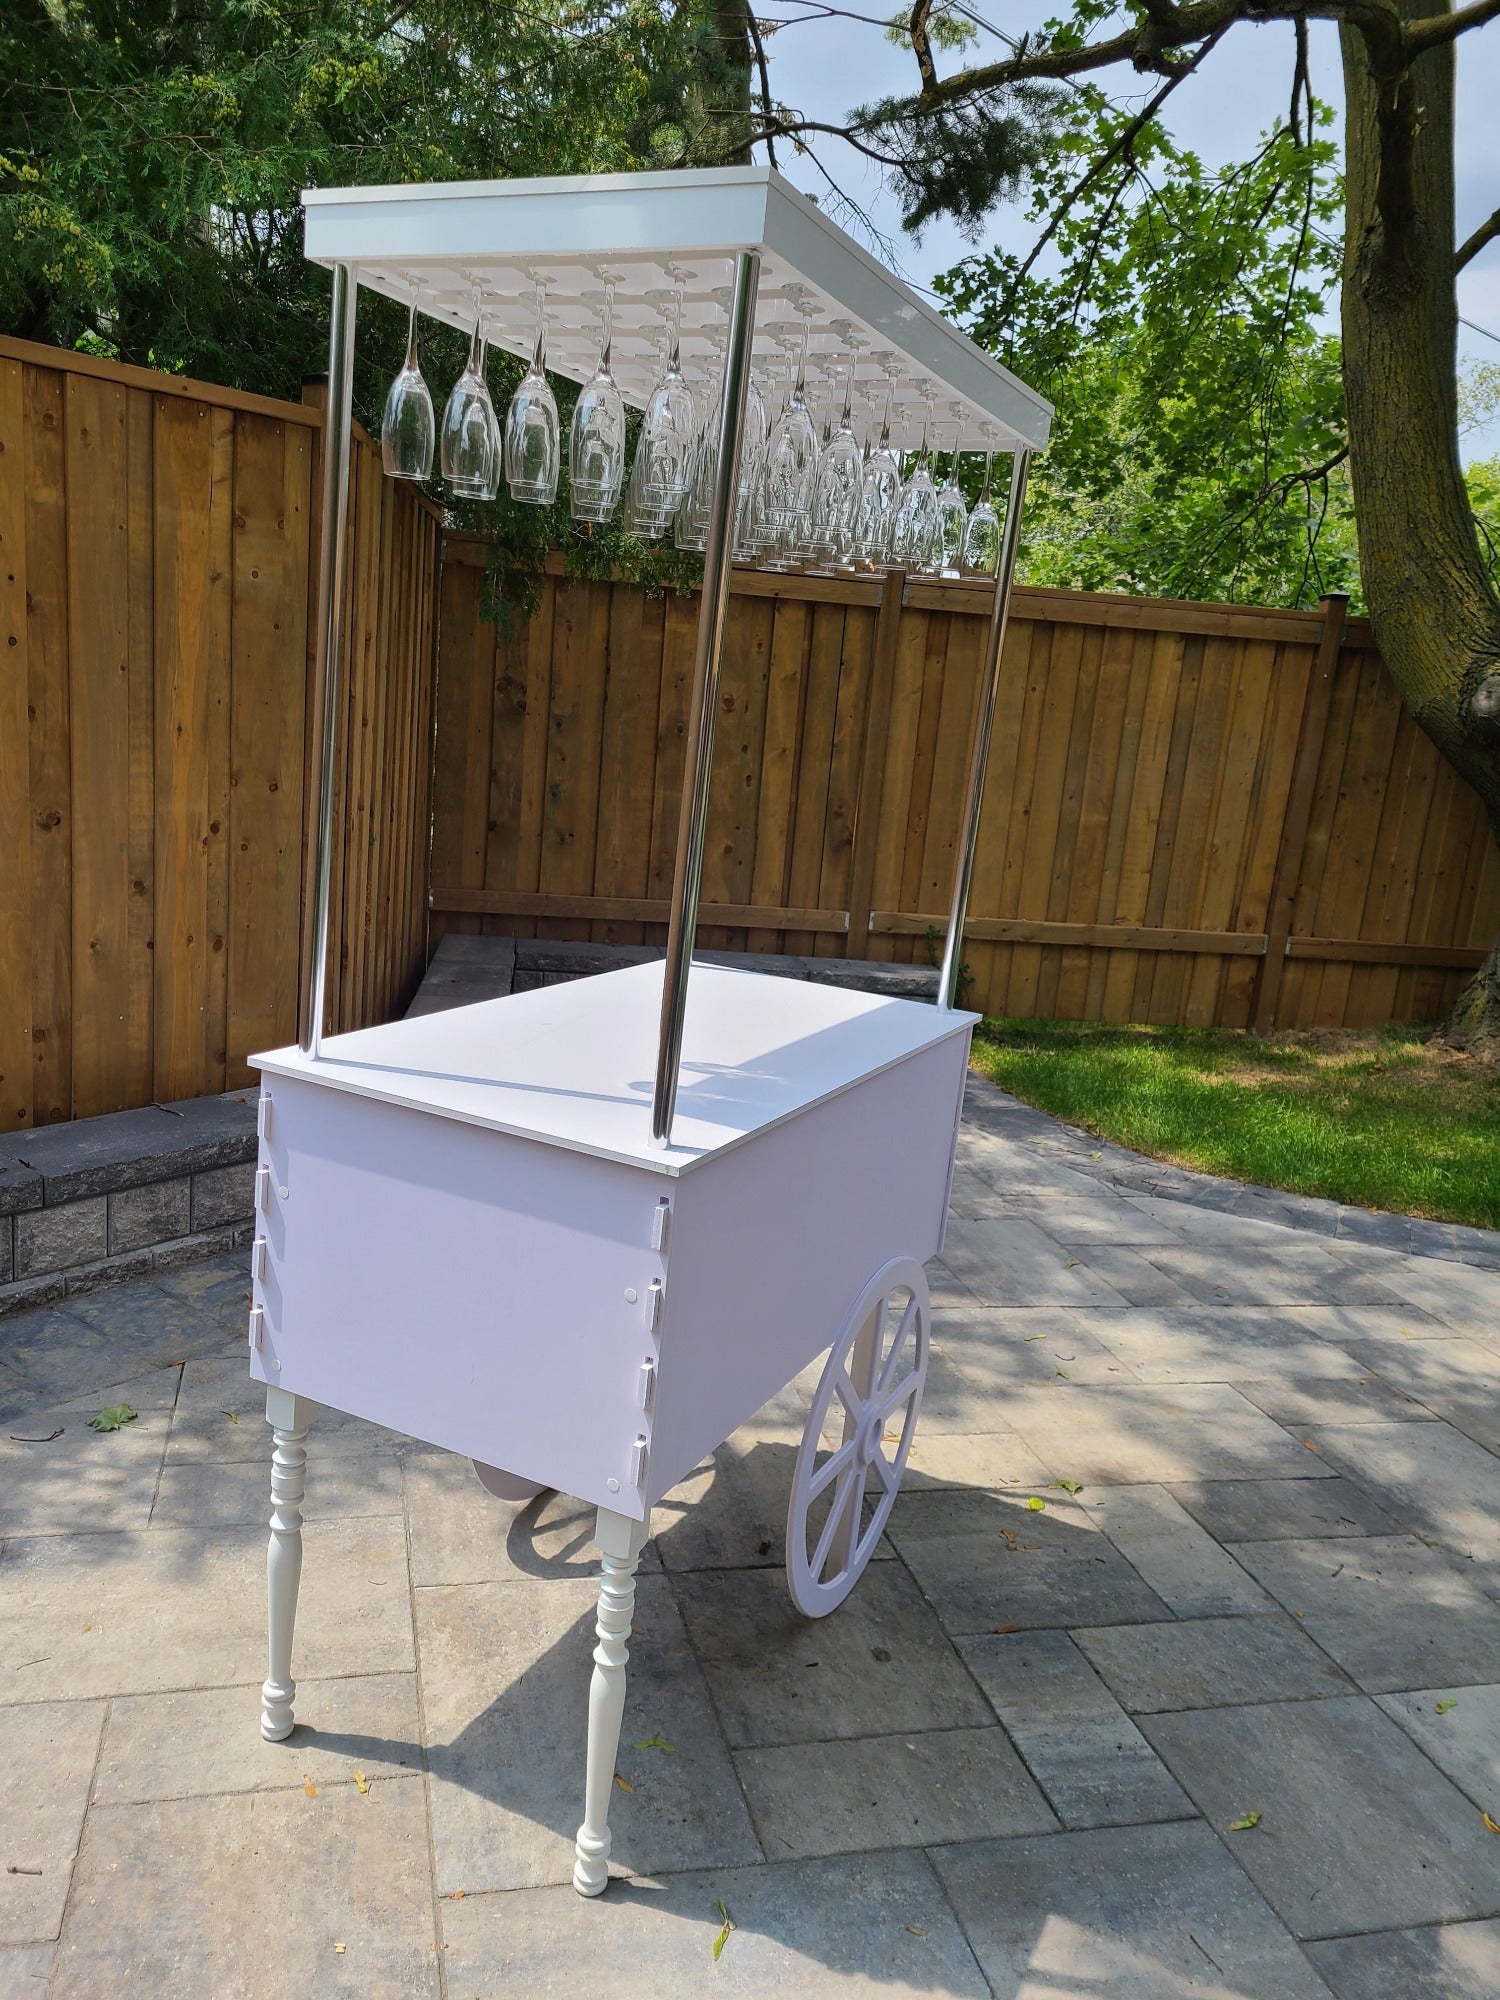 candy carts for sale, Mobile bar cart, drink cart, party decor, wedding decorations, champagne display, event bar, collapsible bar cart, white PVC bar cart, Toronto-made party supplies